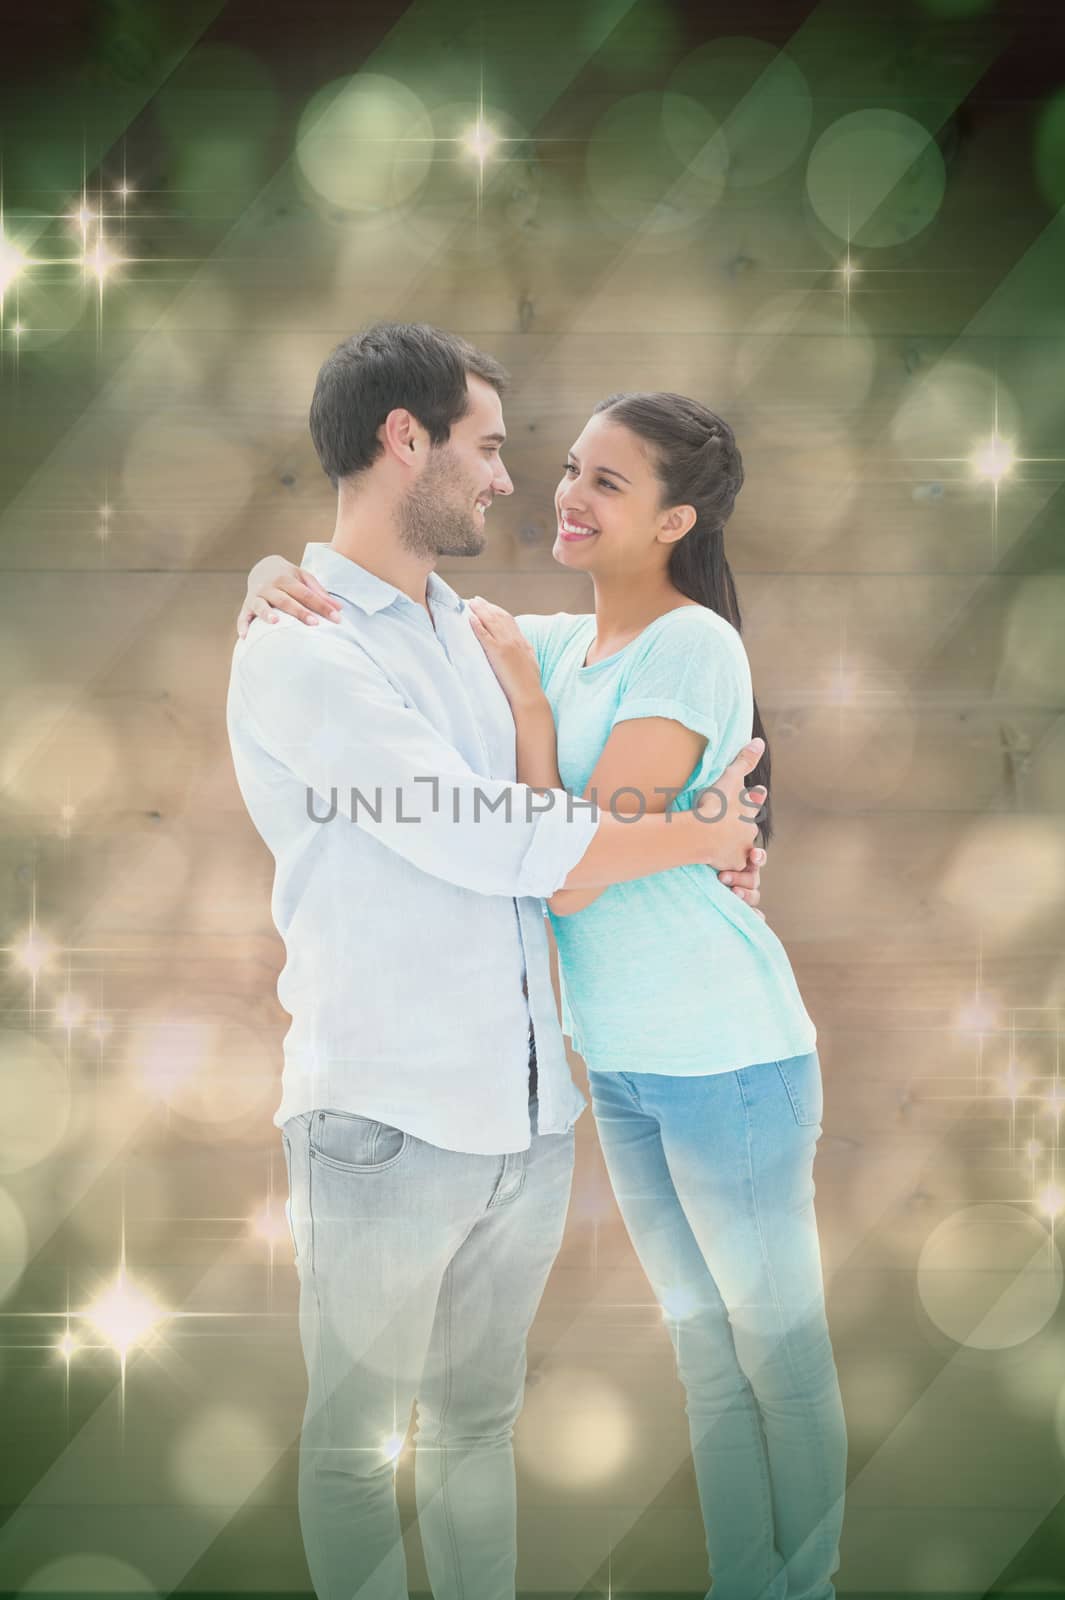 Attractive young couple hugging each other against light design shimmering on green